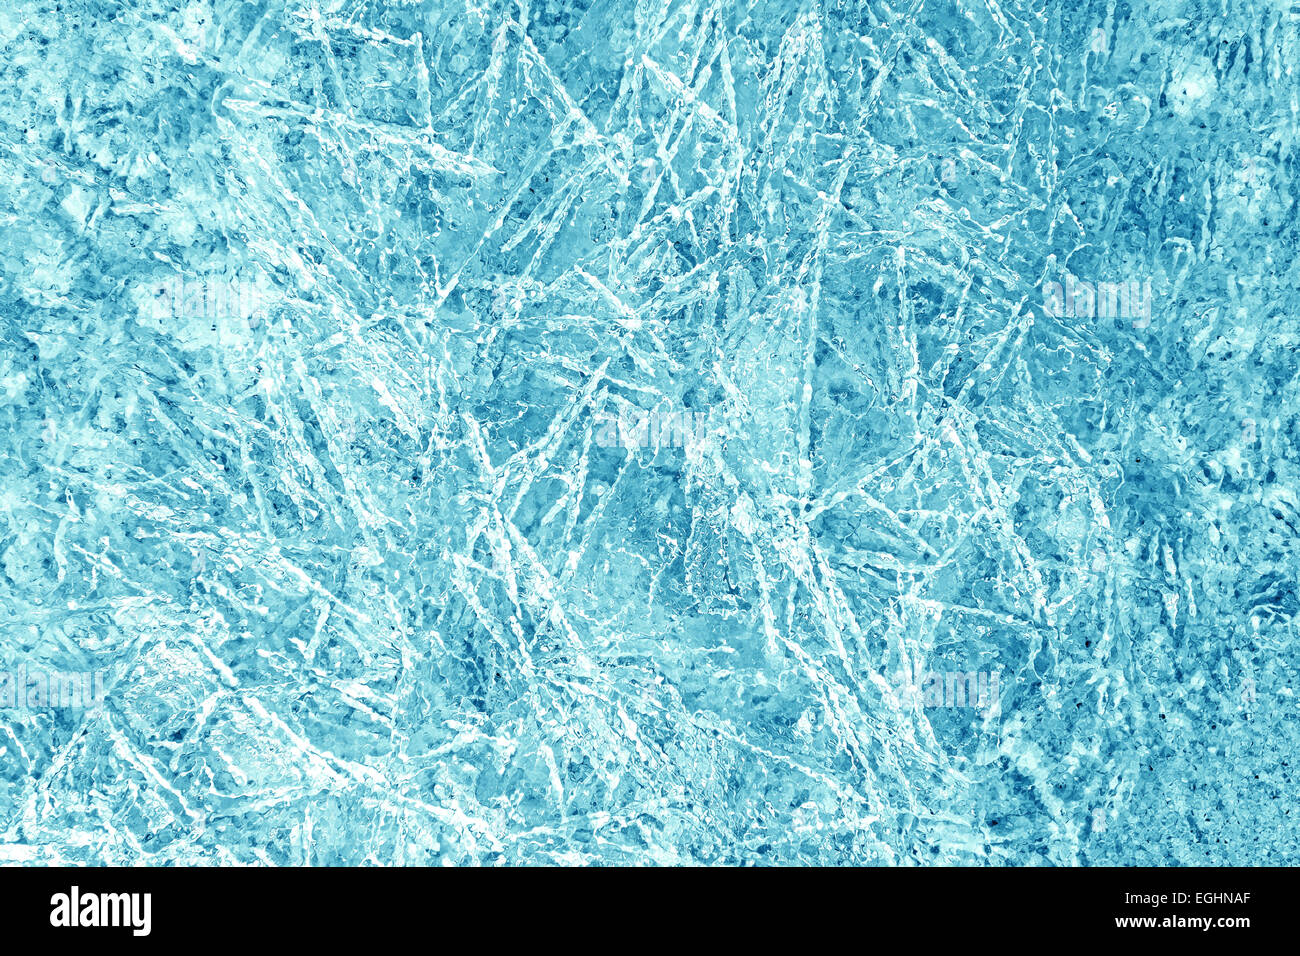 Abstract blue background made of ice crystals. Stock Photo